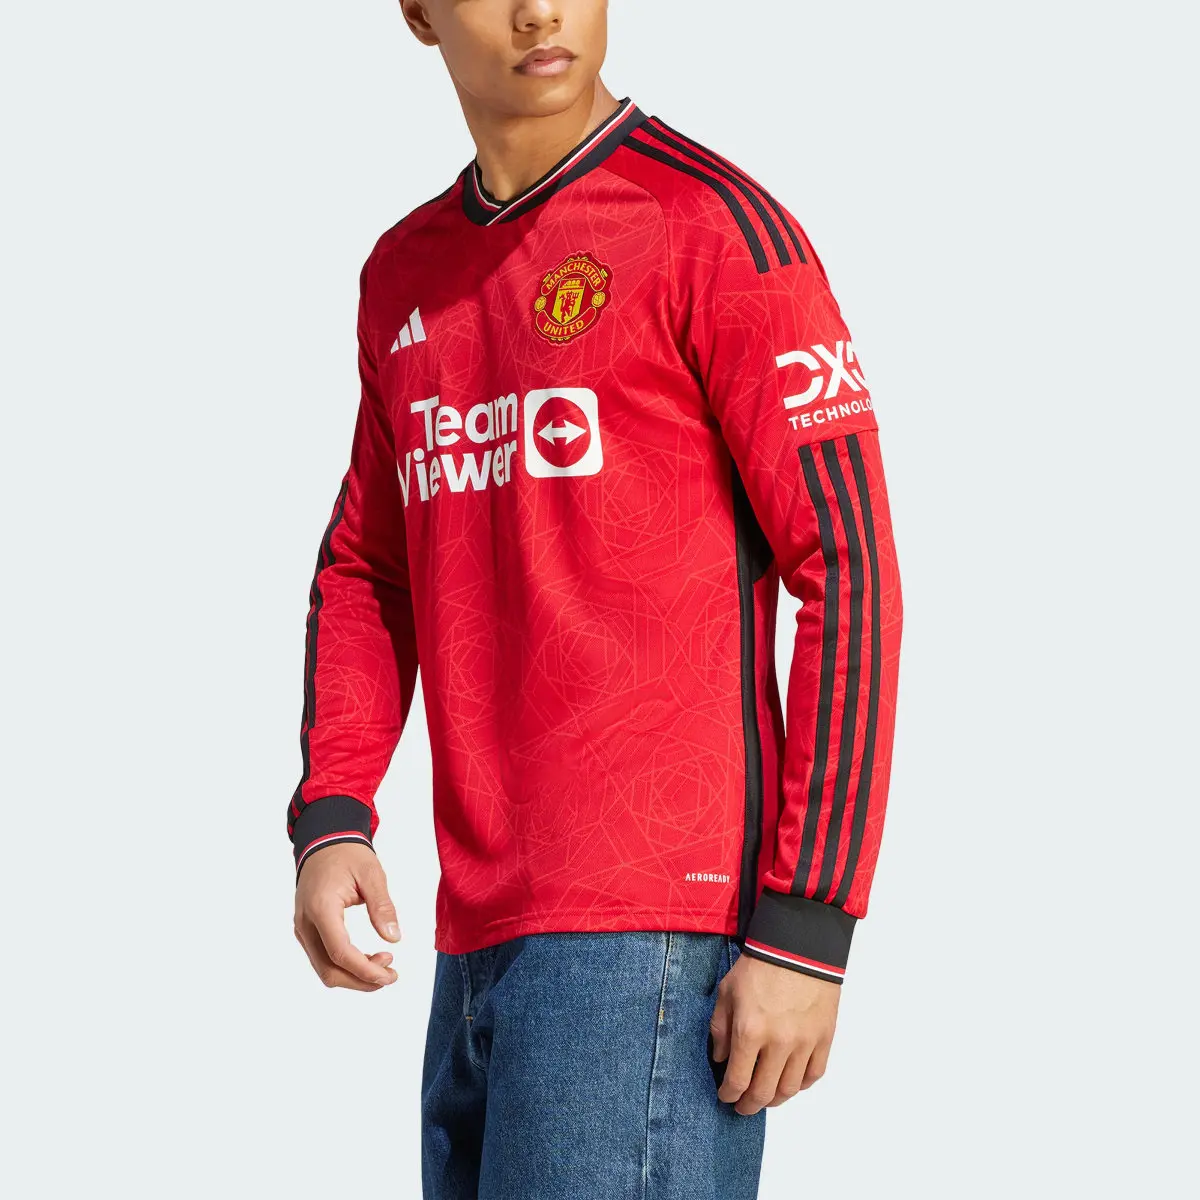 Adidas Maglia Home 23/24 Long Sleeve Manchester United FC. 1